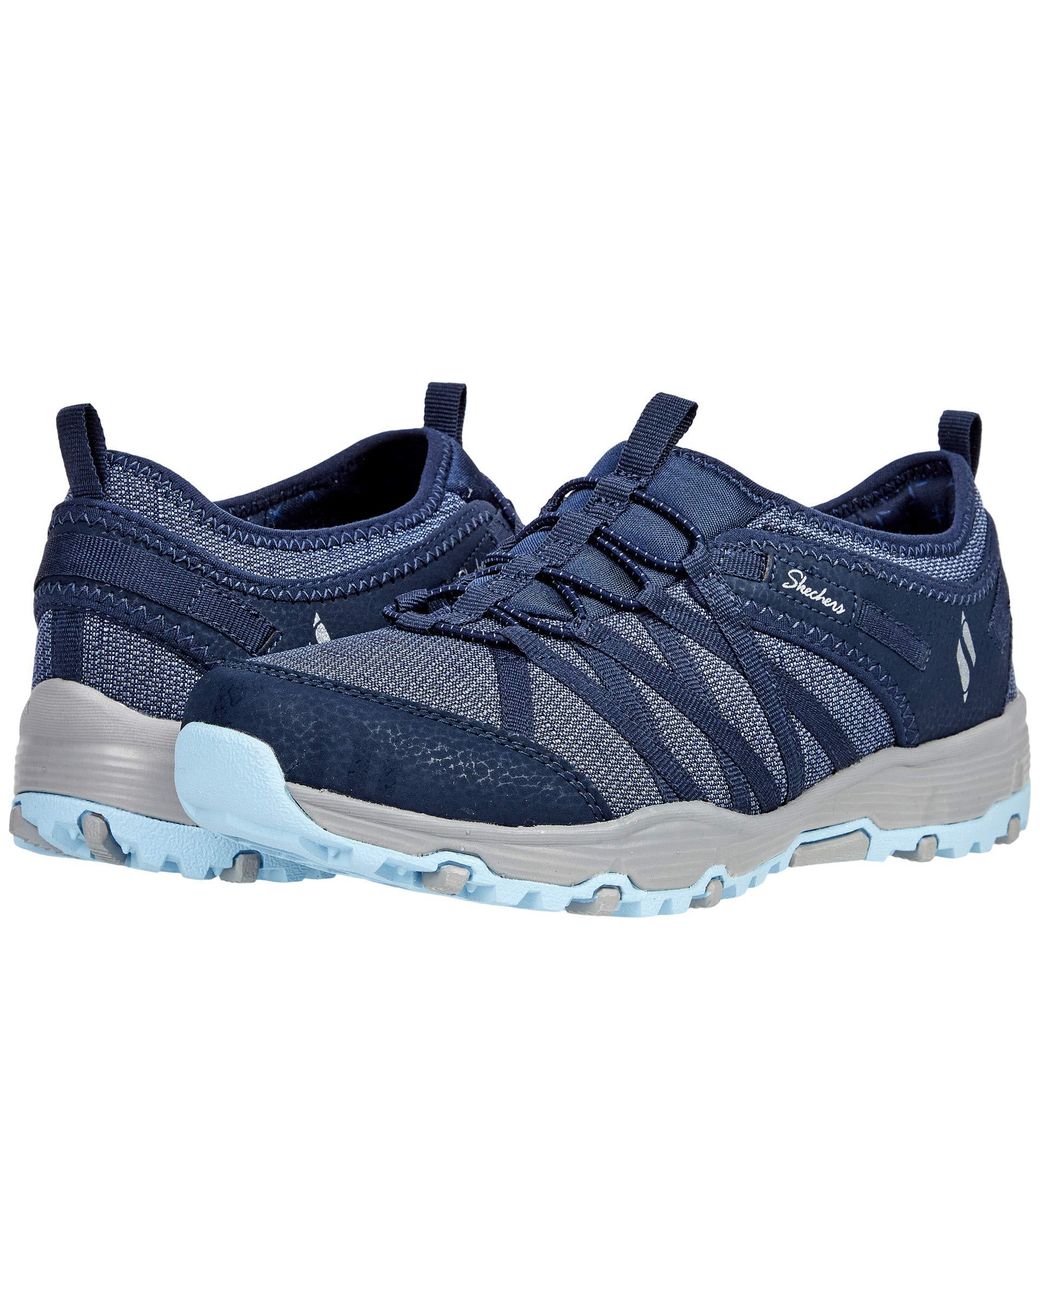 Skechers Seager Hiker - Topanga in Blue | Lyst